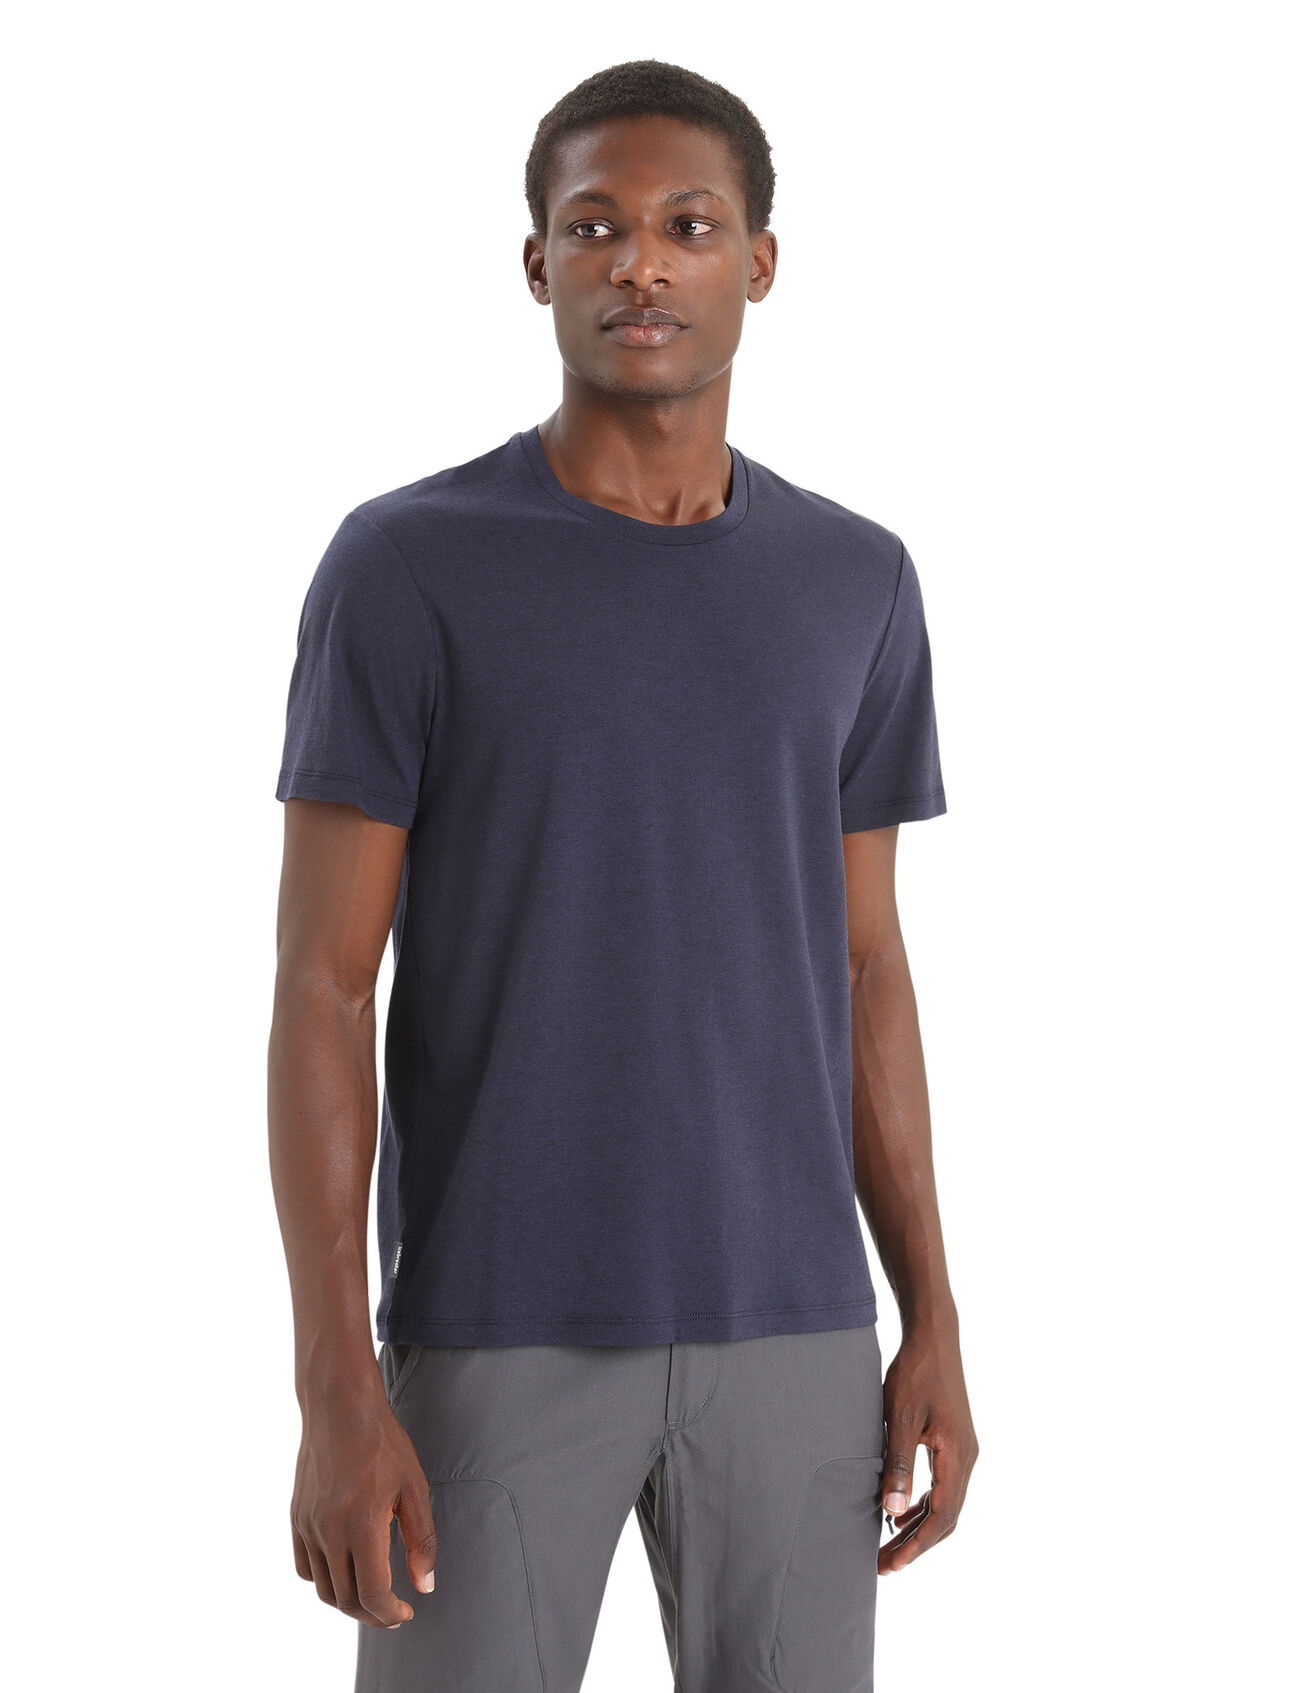 Mens Merino Blend Central T-Shirt A versatile, everyday tee that goes anywhere in comfort, the Central Classic Short Sleeve Tee features a sustainable blend of natural merino wool and soft organically grown cotton.